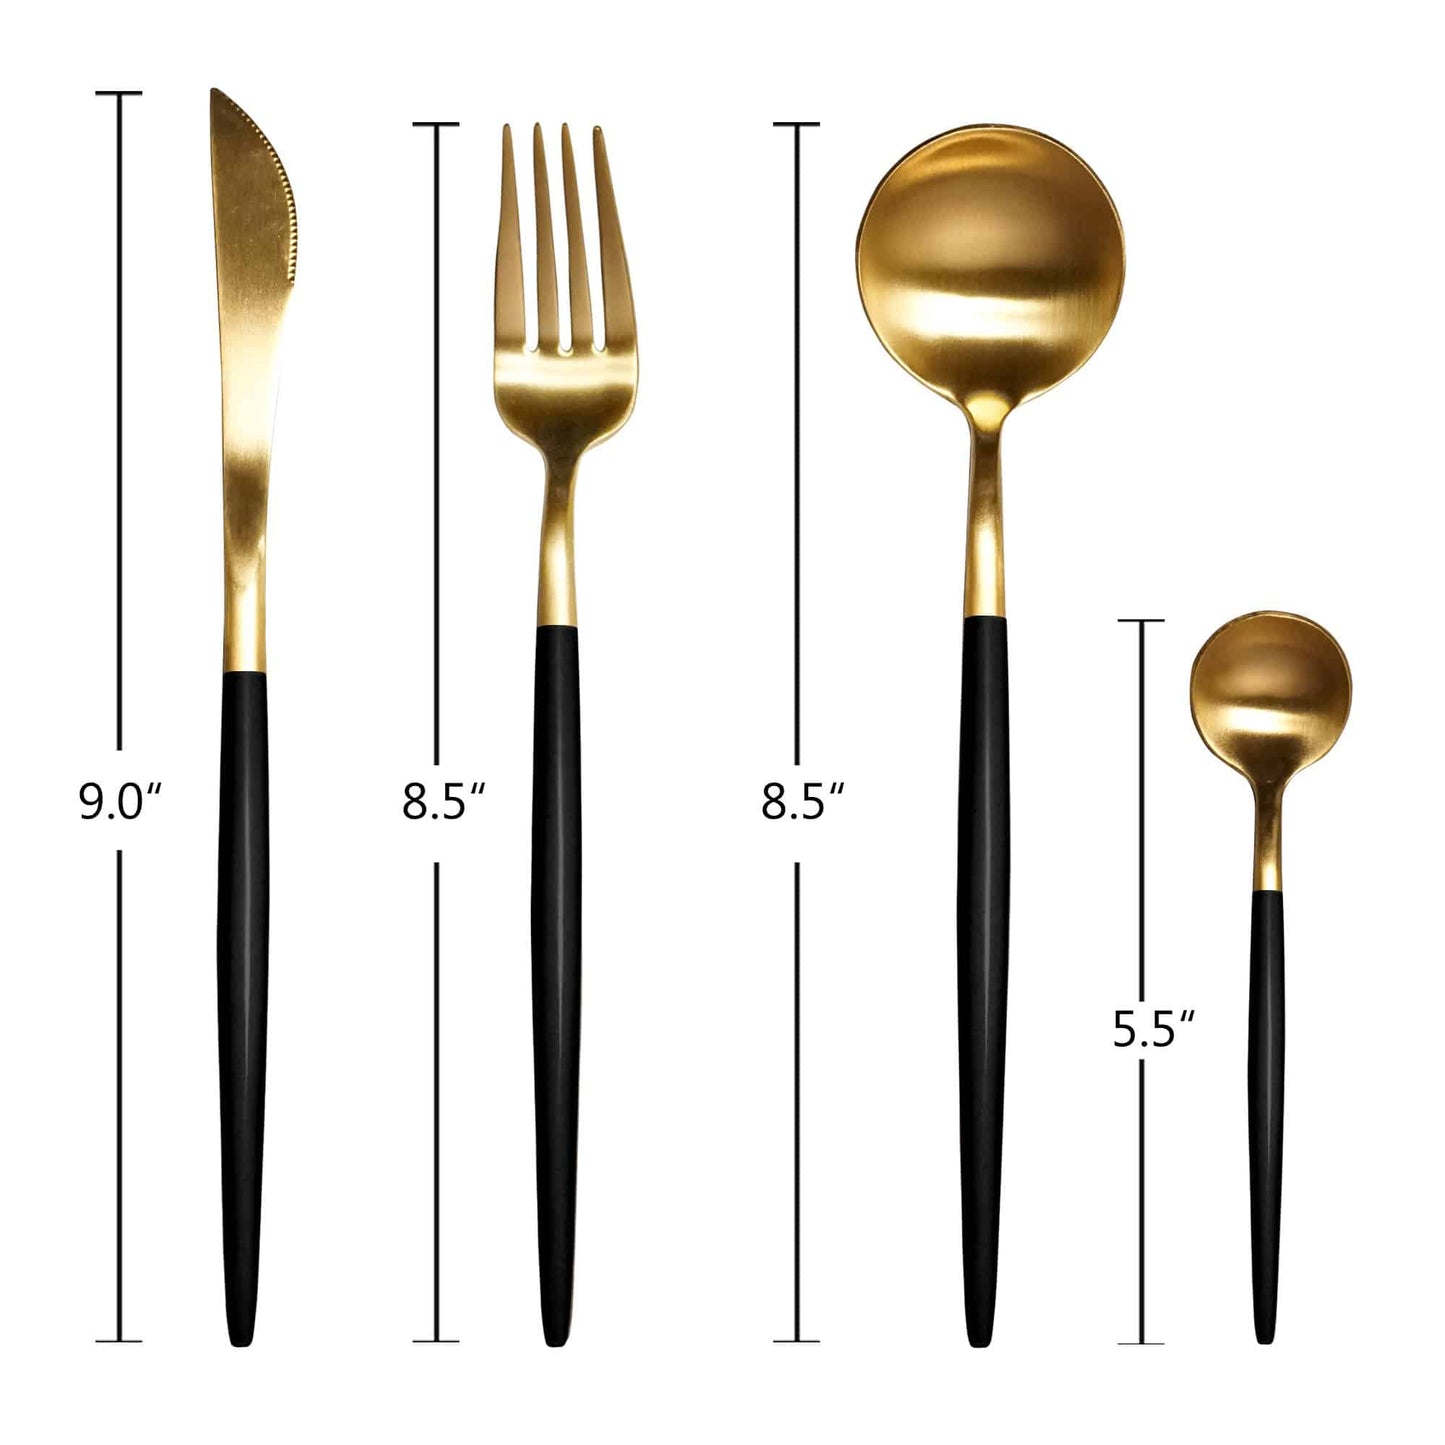 Home Decor Nordic Stainless Steel Dining Cutlery Set-Black Gold - The Decor Circle